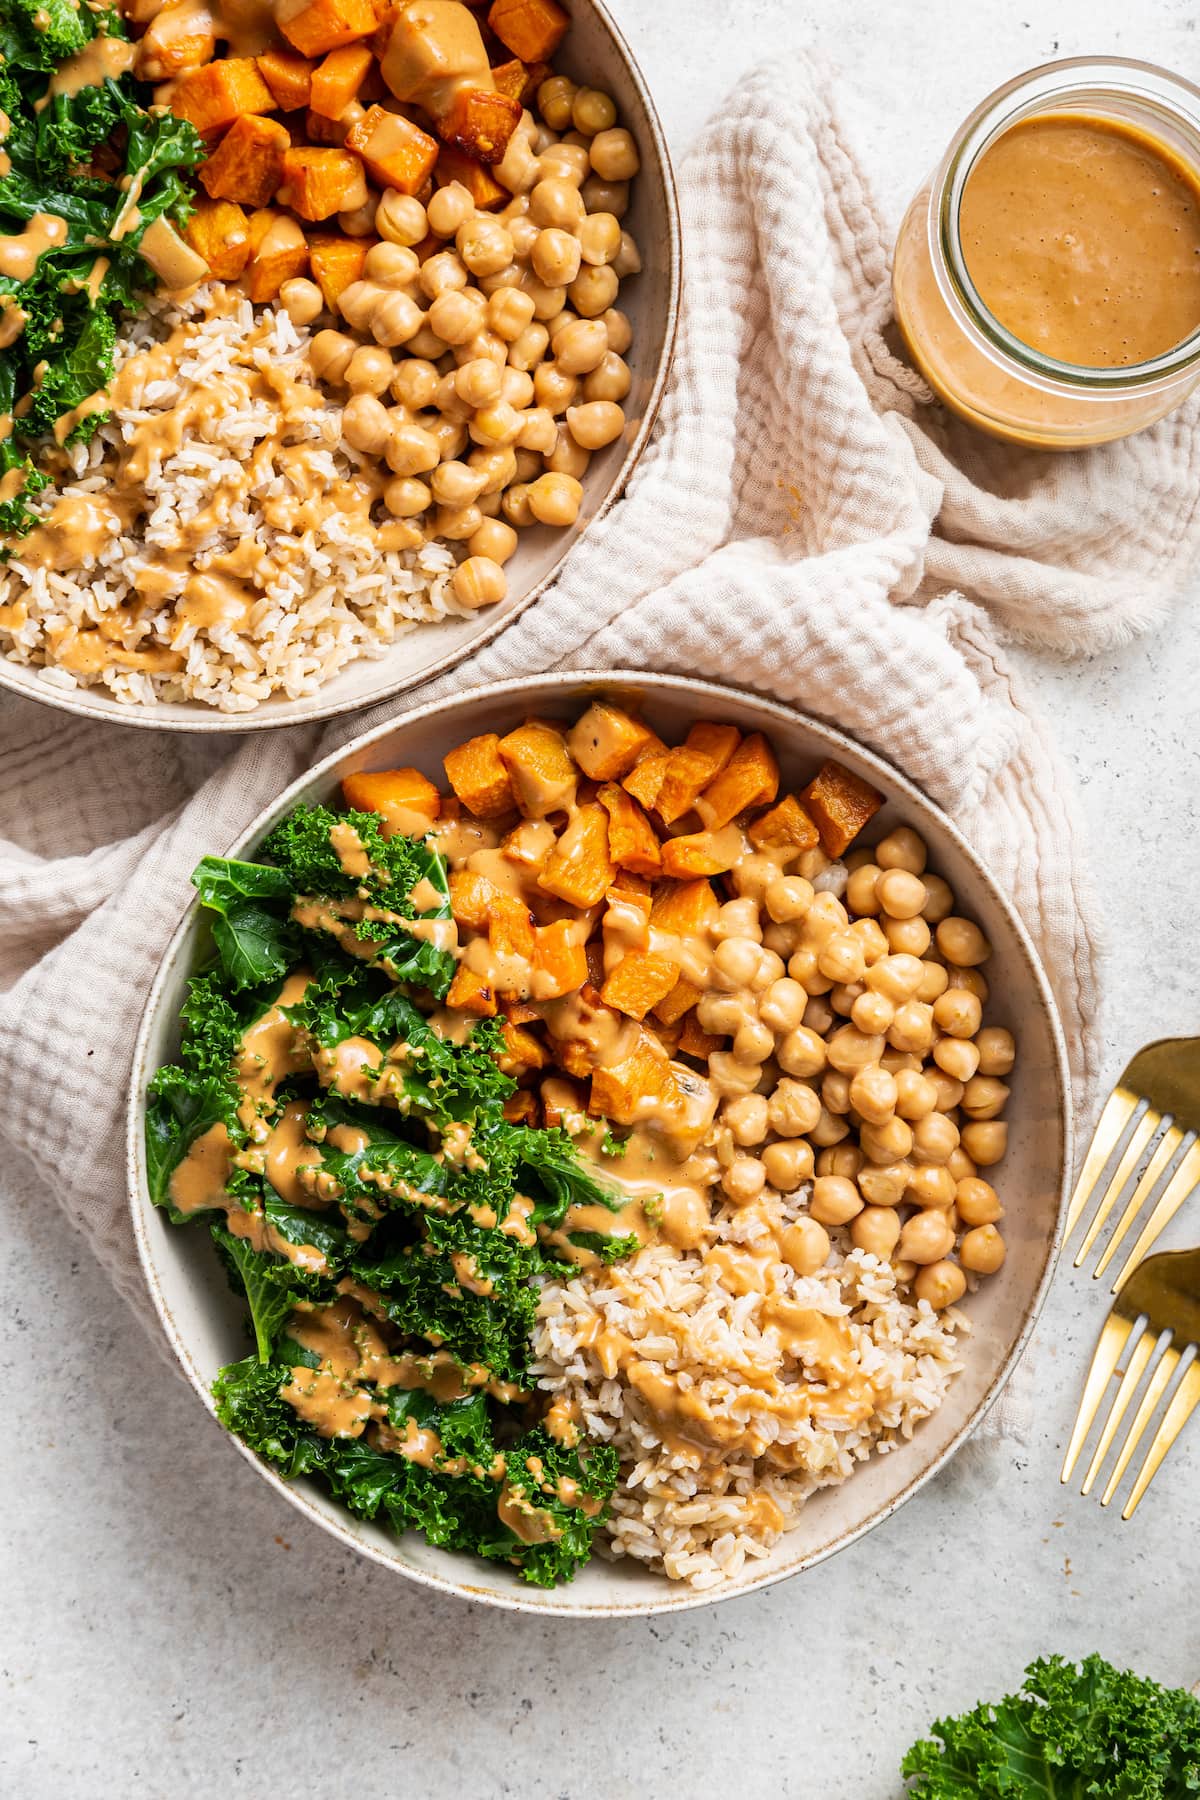 Two white bowls containing kale, sweet potato, chickpeas, brown rice, and a creamy peanut sauce.